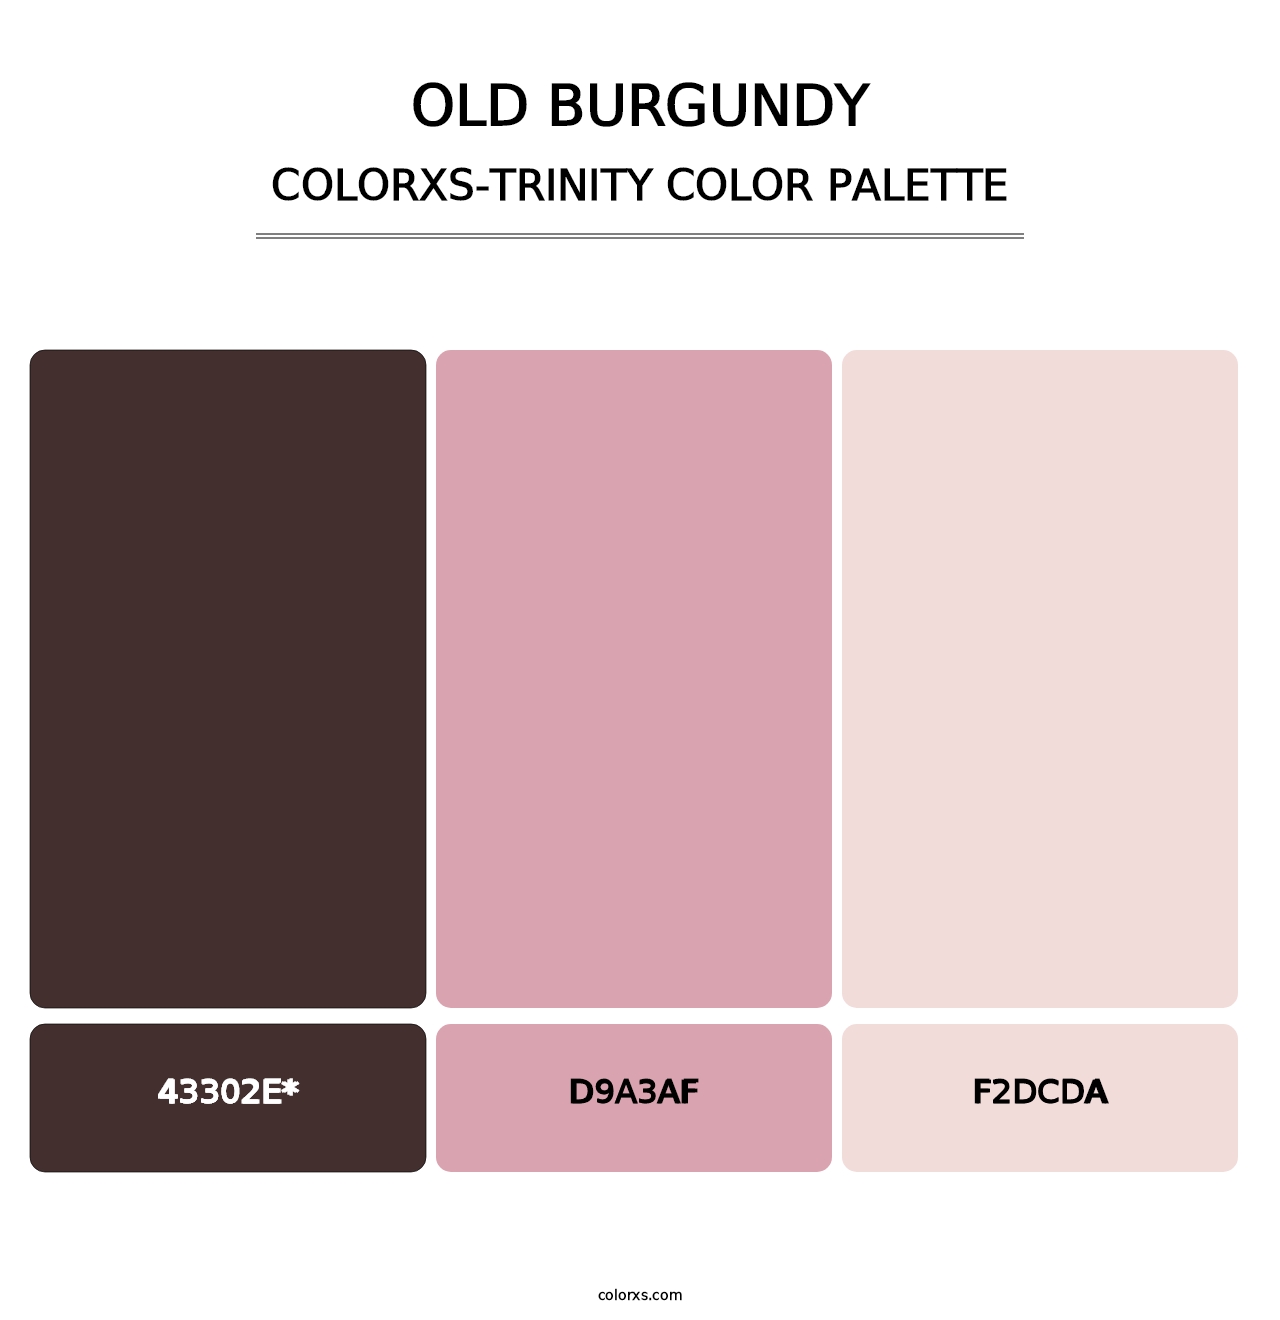 Old Burgundy - Colorxs Trinity Palette